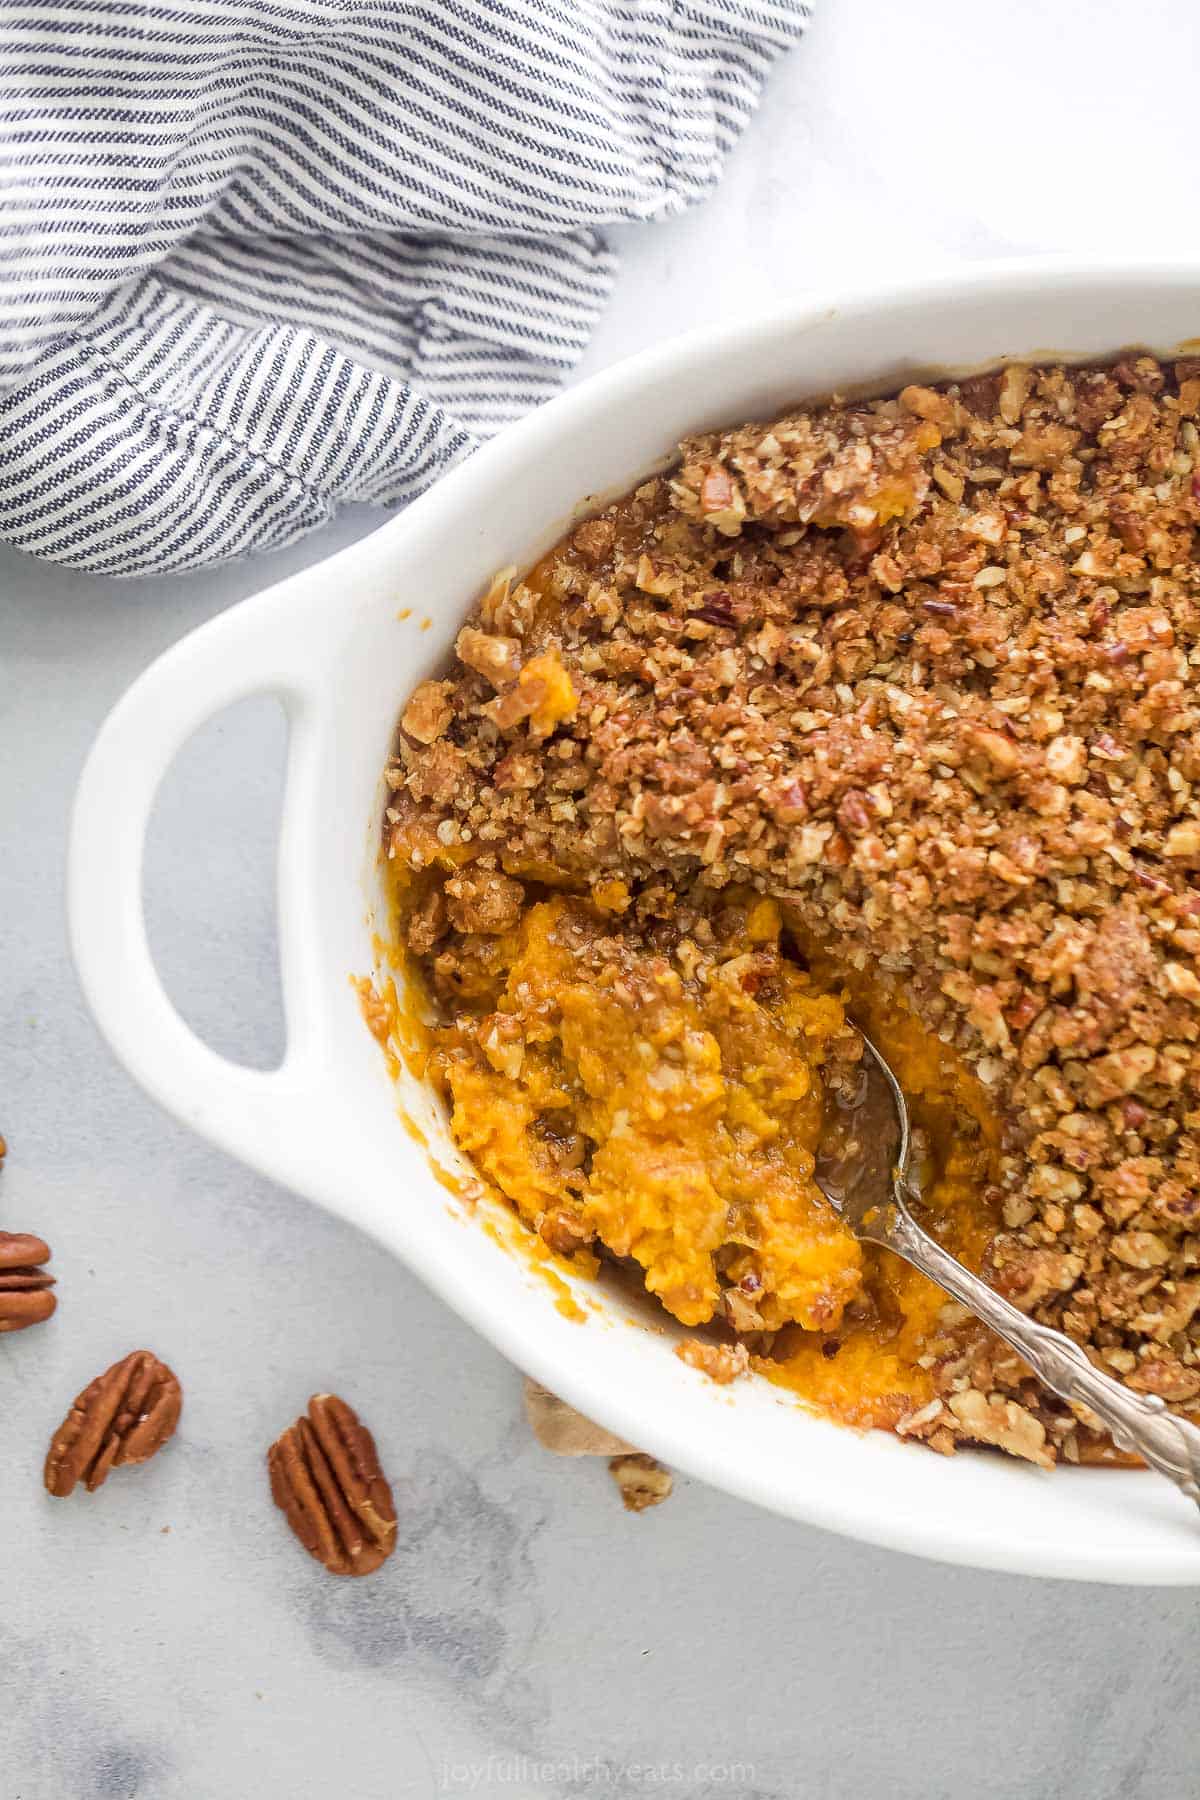 A white casserole dish containing a sweet potato casserole with a few pecans and a kitchen towel beside it